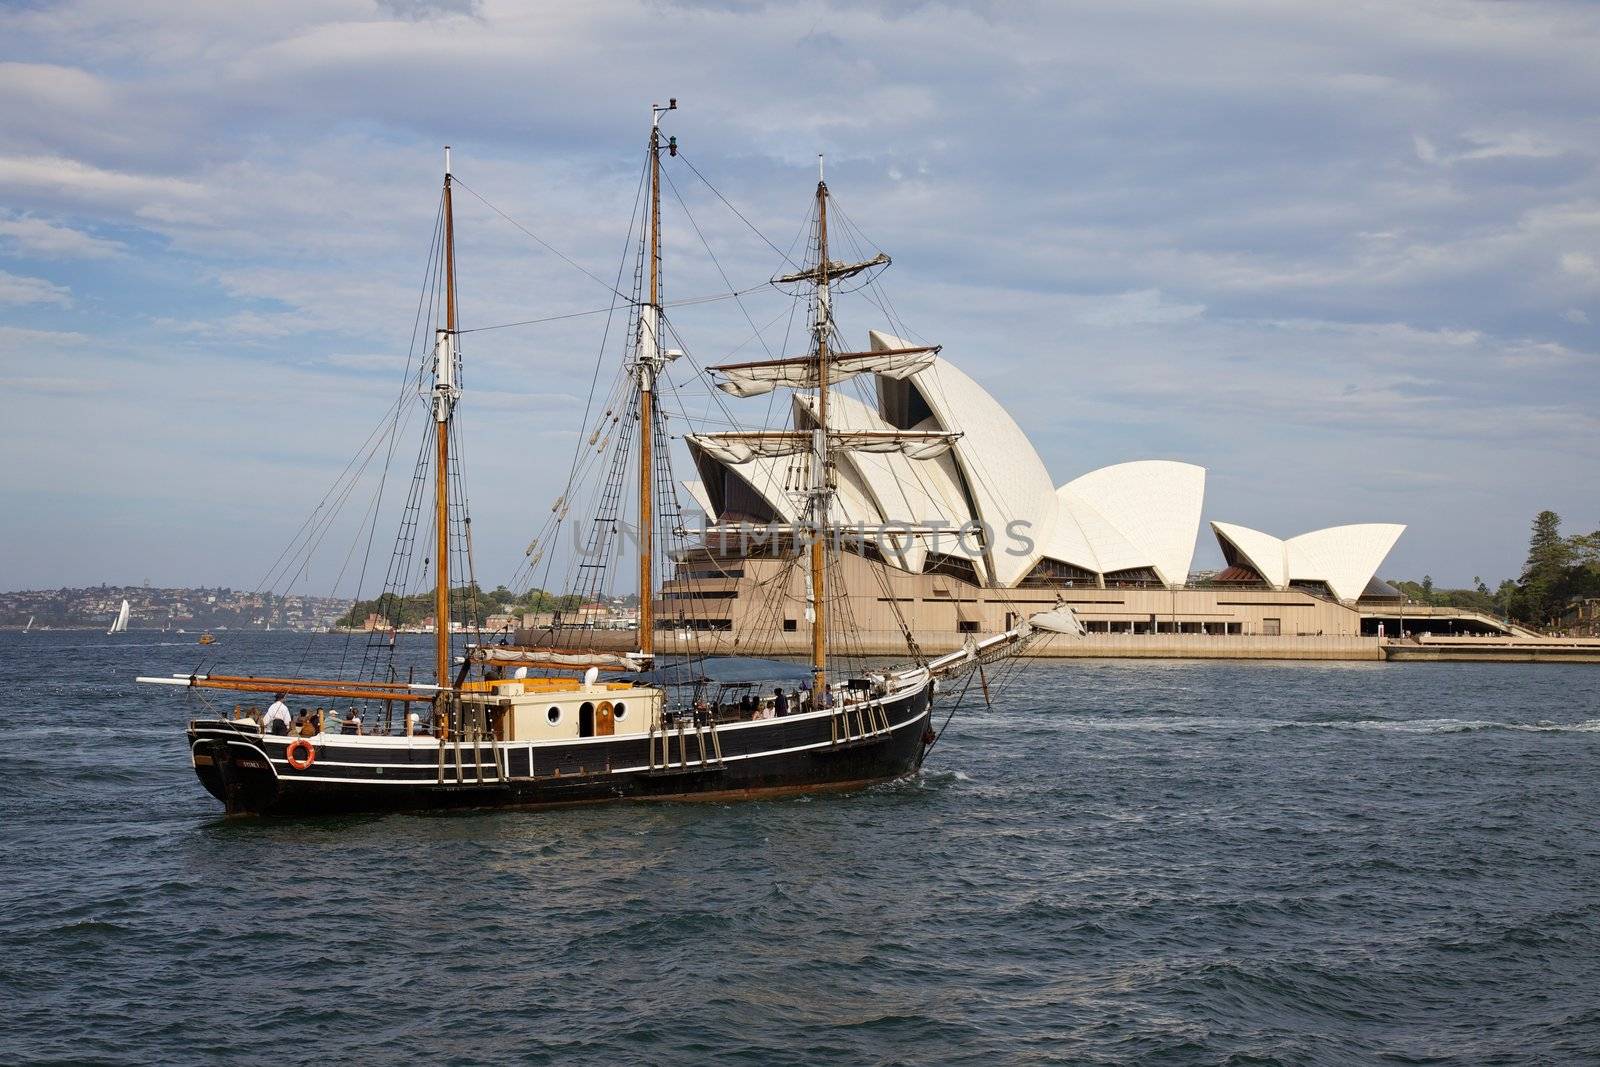 Sydney Clipper Ship With the Sydney Opera House in the Background